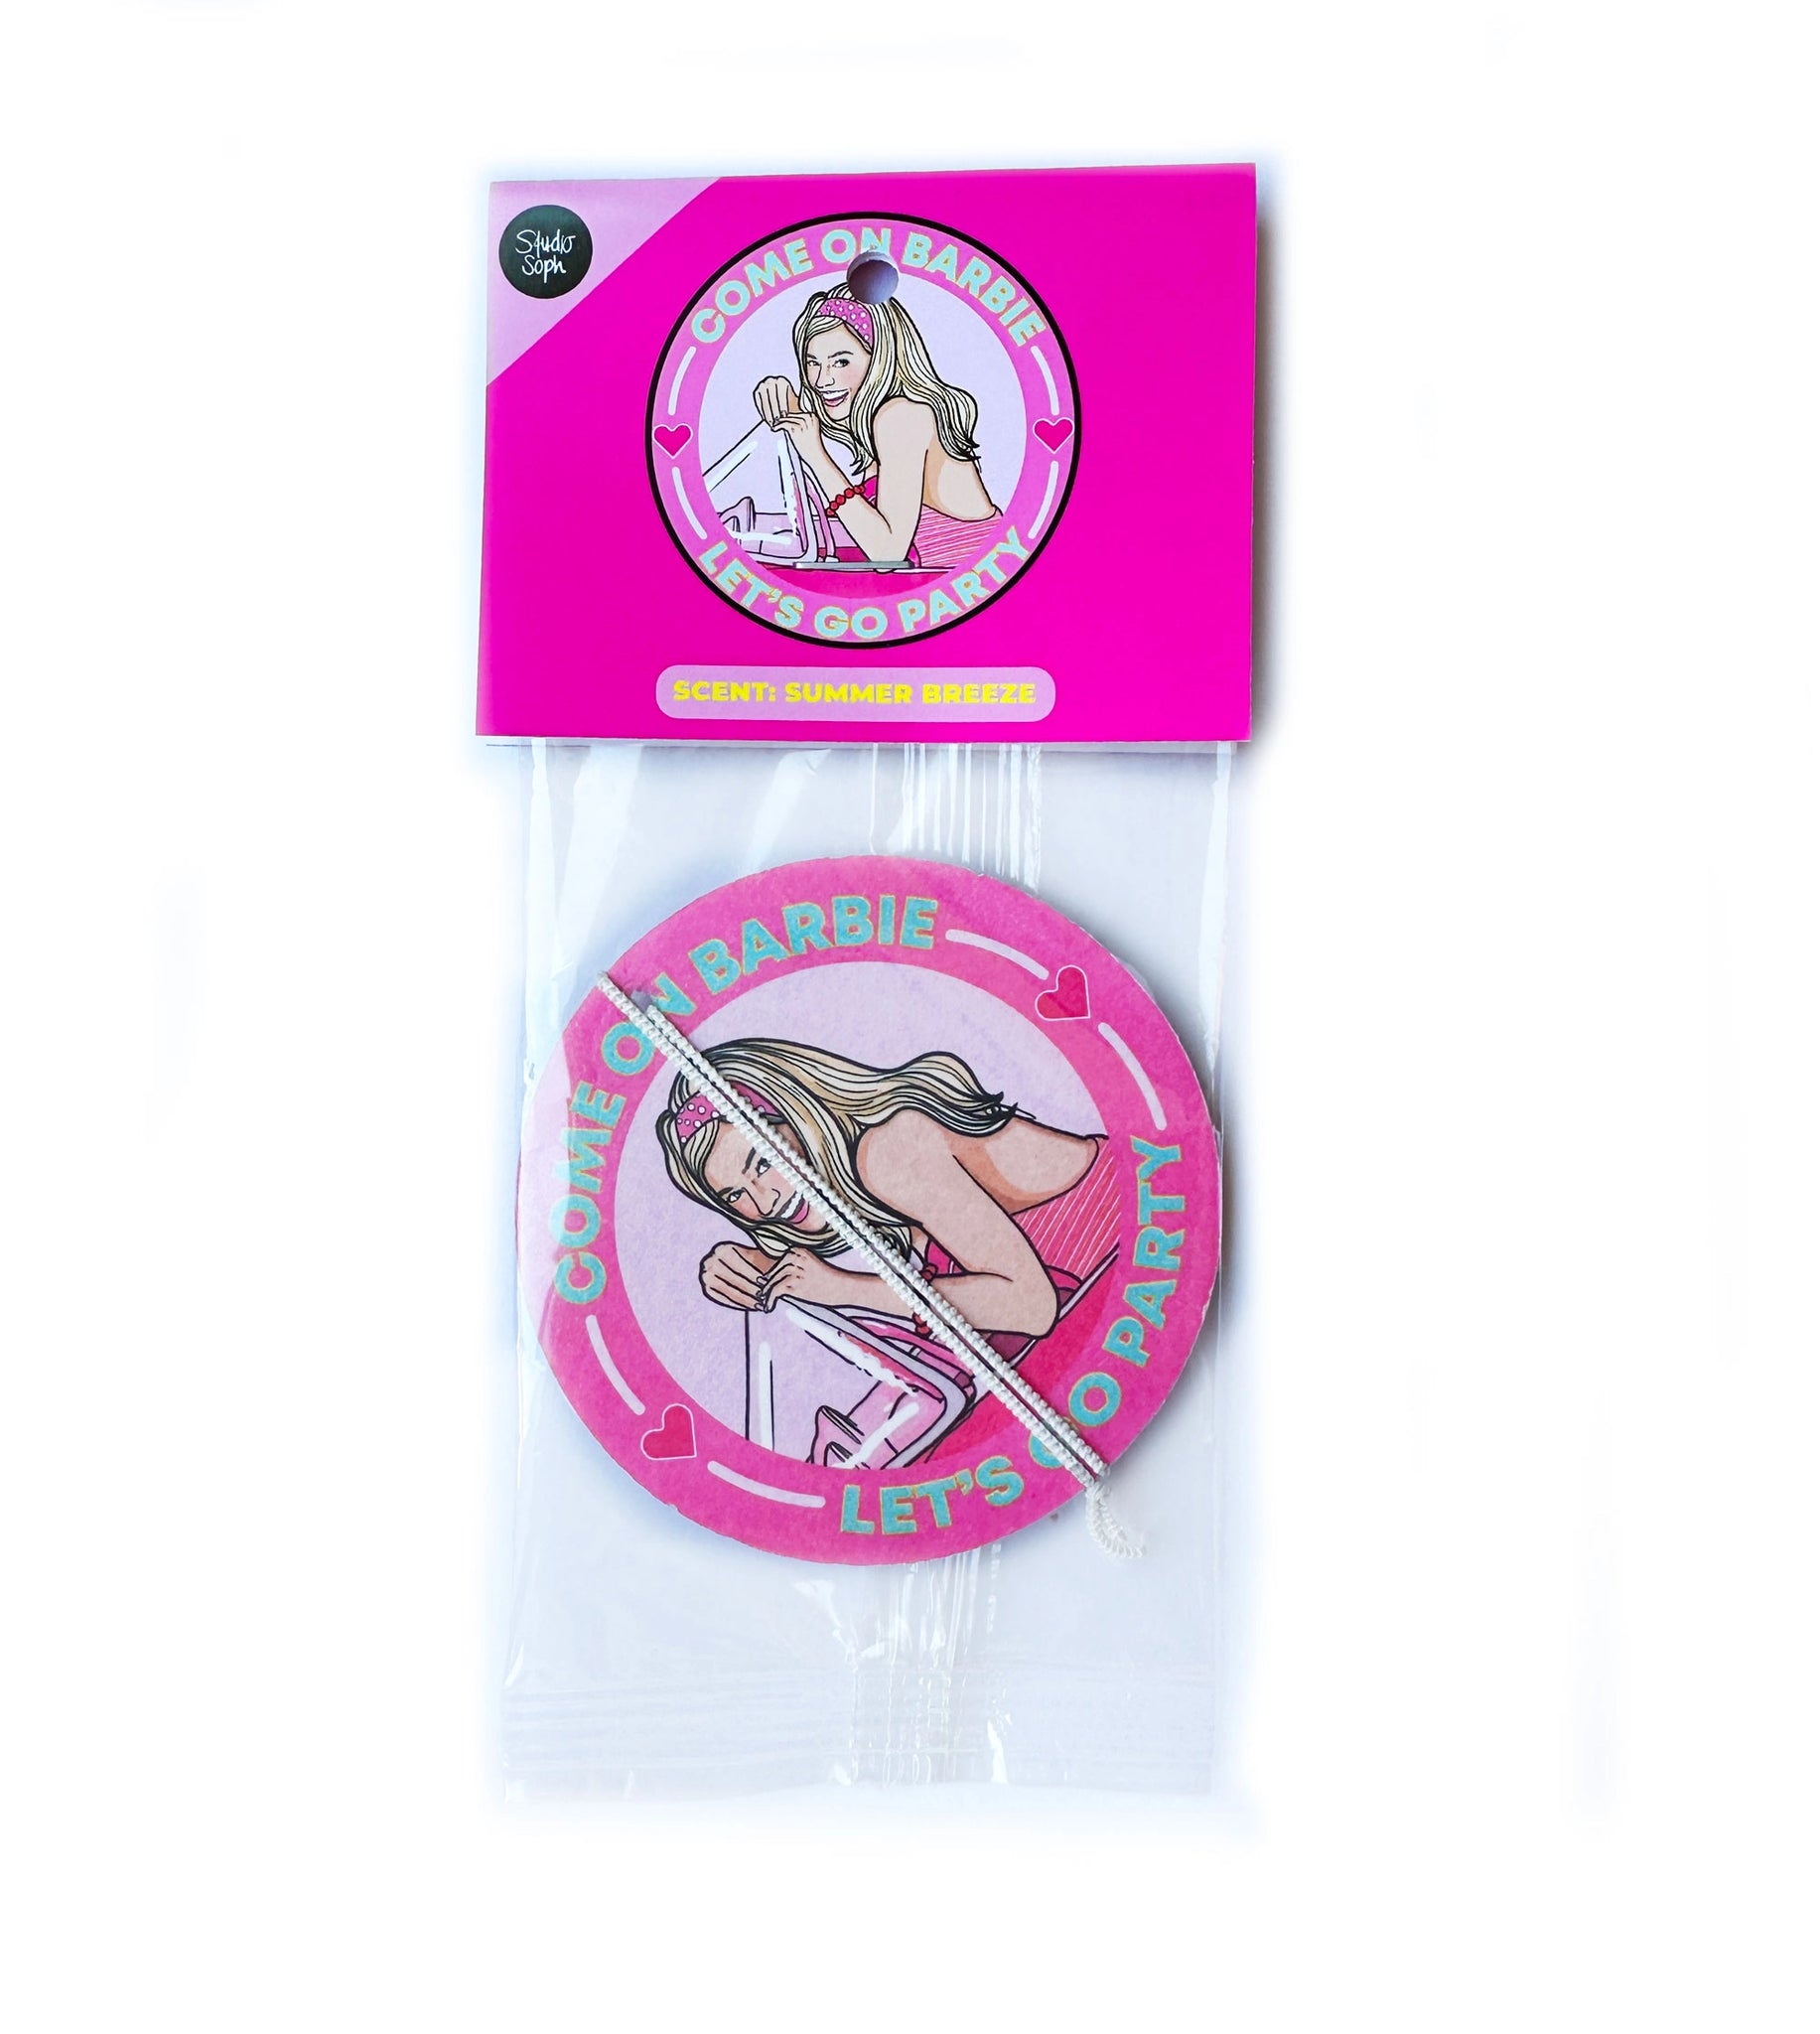 Barbie “Let’s Go Party” Air Freshener